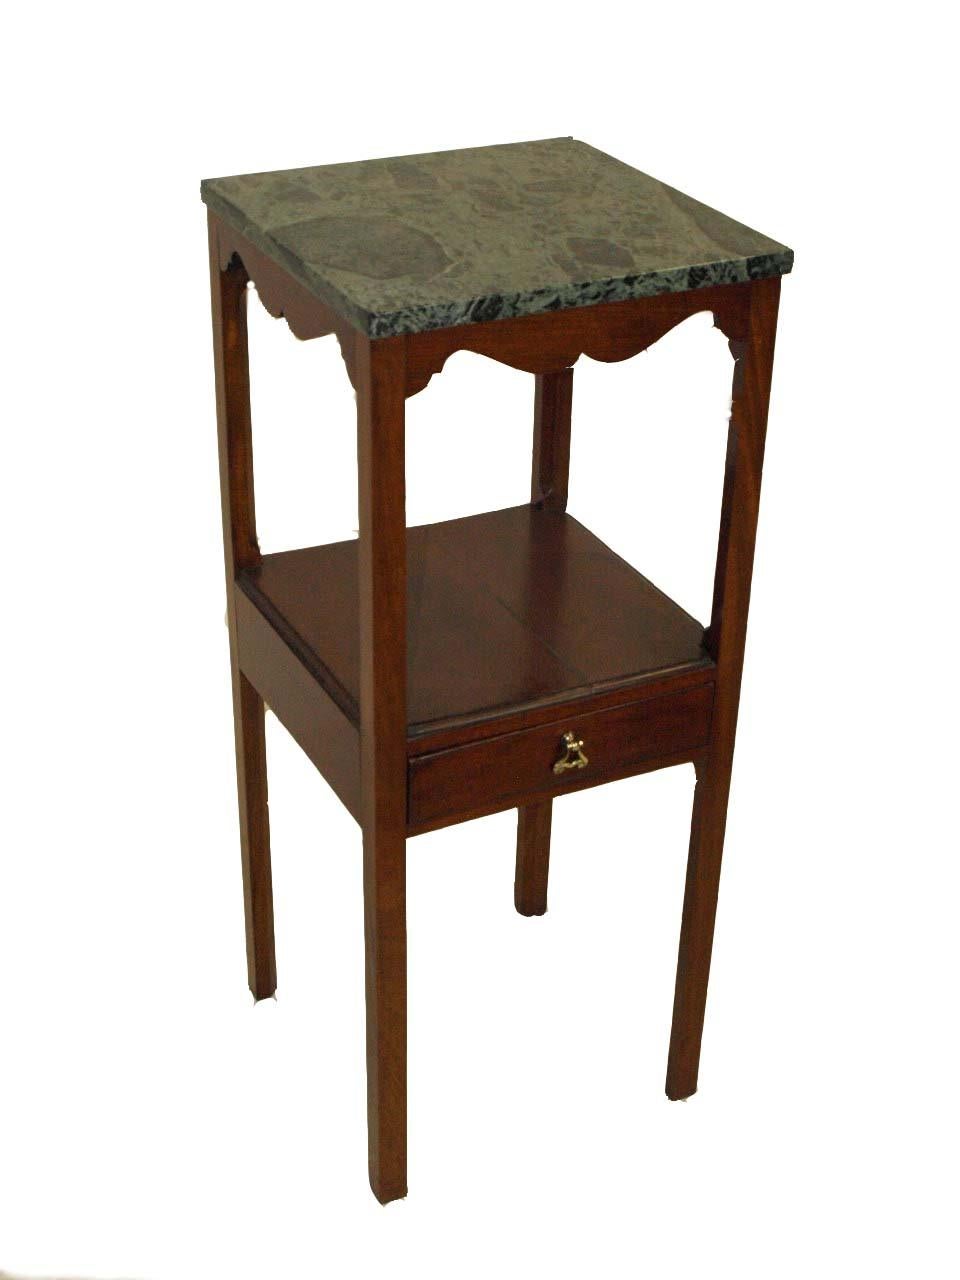 English mahogany marble top stand with verde marble top above scalloped apron , lower shelf and single drawer with swing brass pull, circa 1810, marble is not original to the piece.